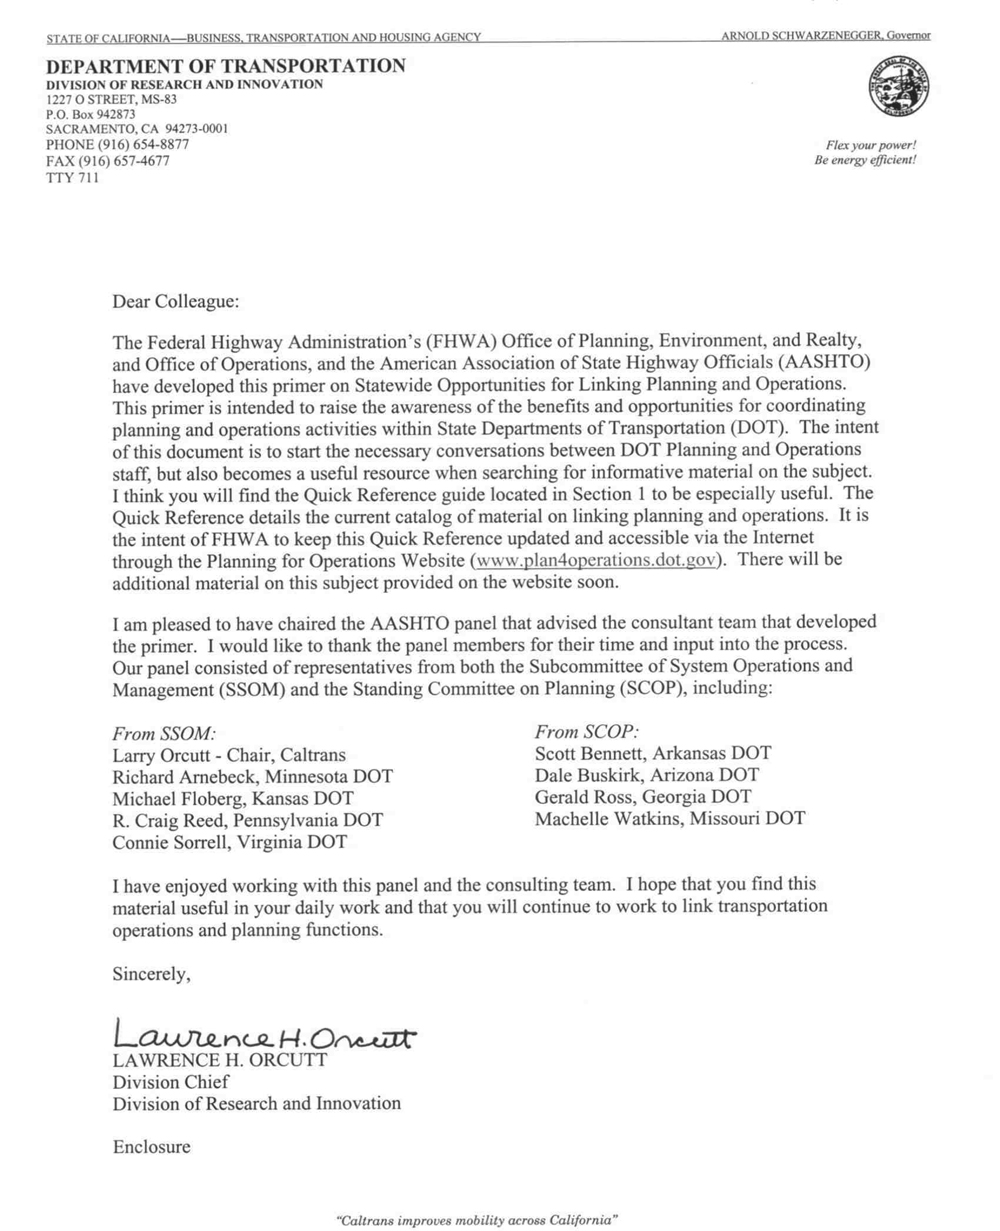 Image - Coverletter from the Chair of the AASHTO Panel